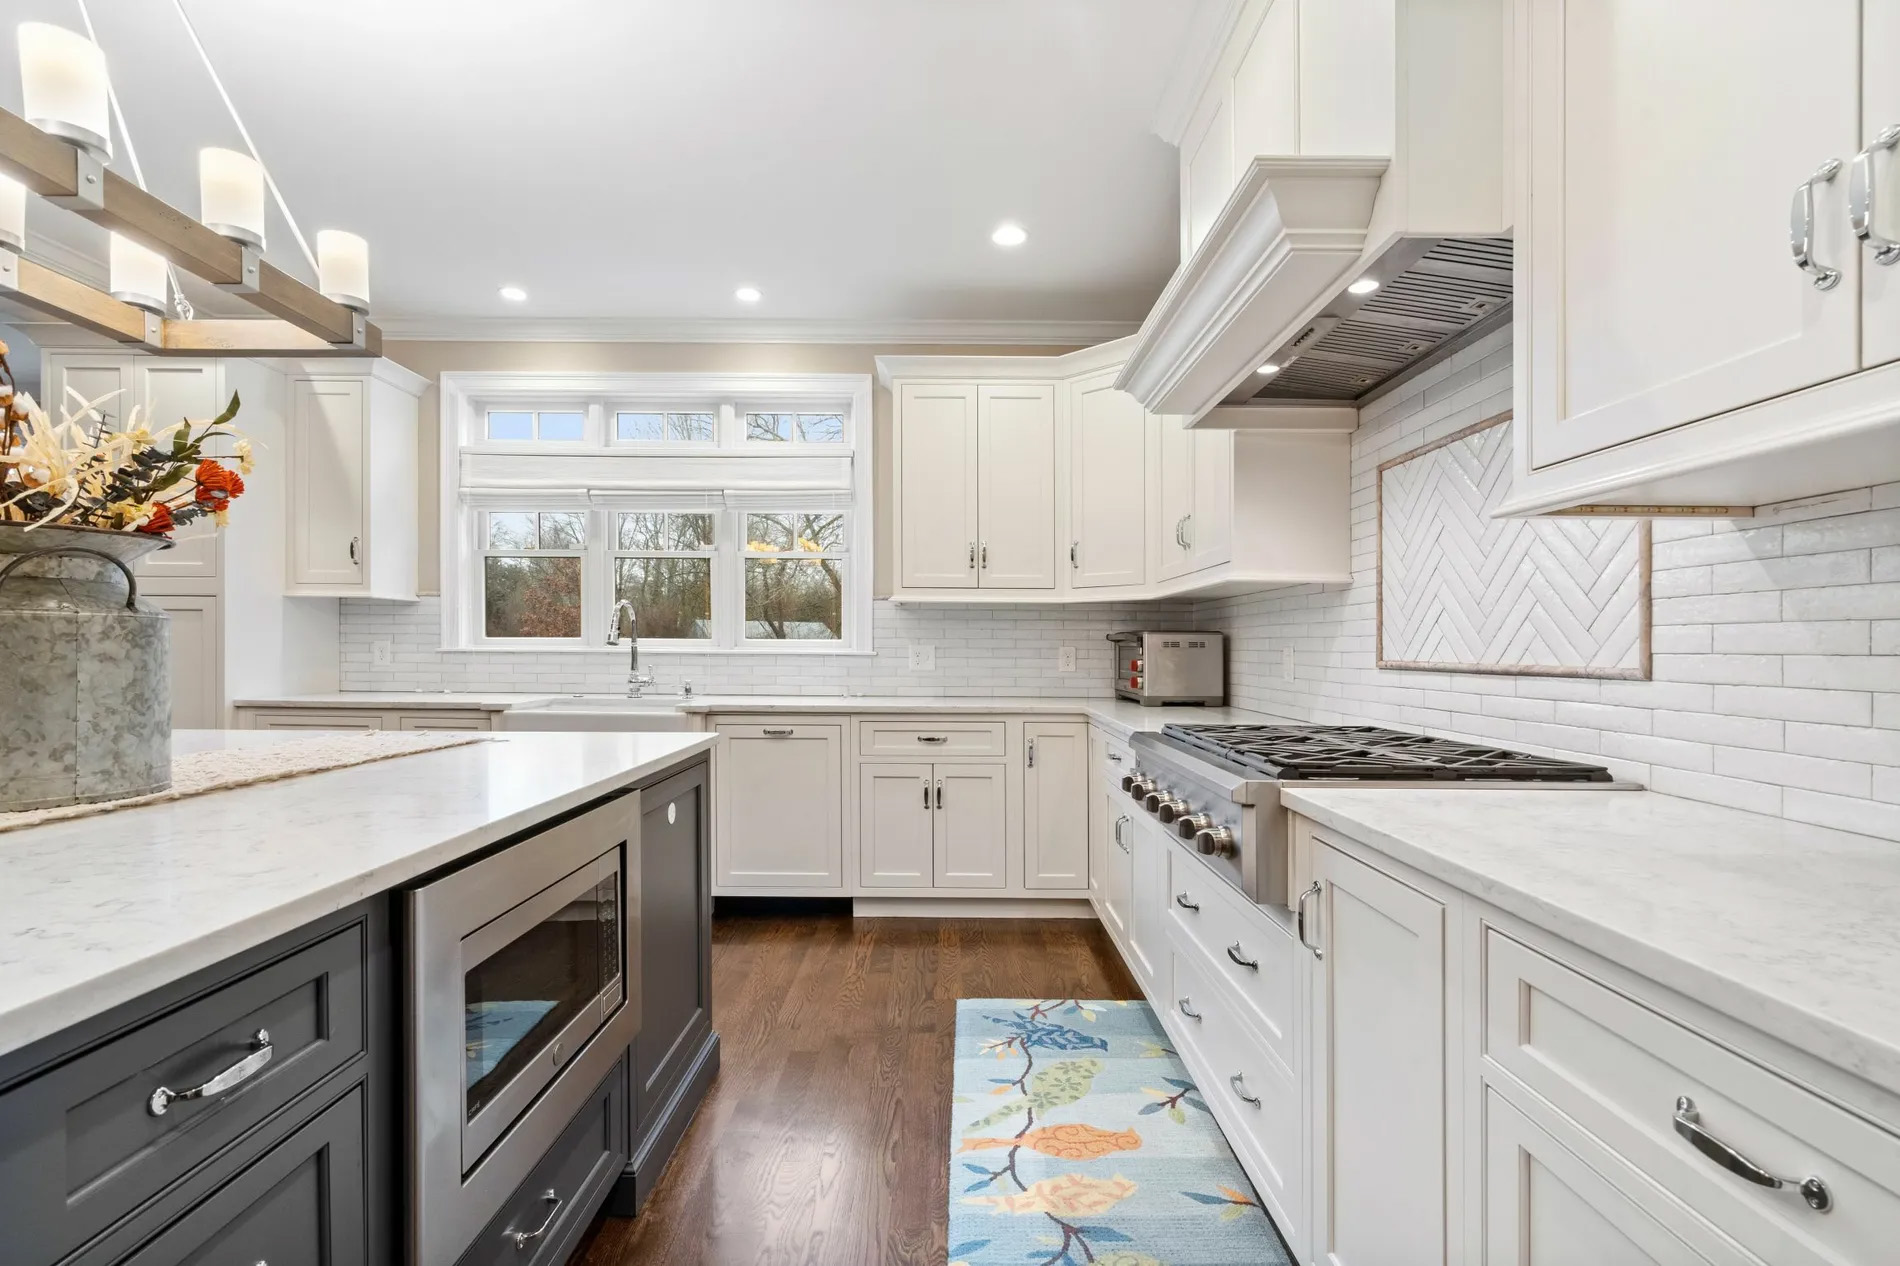 White wall cabinets with a blue-gray island. Built in stainless steel appliances.